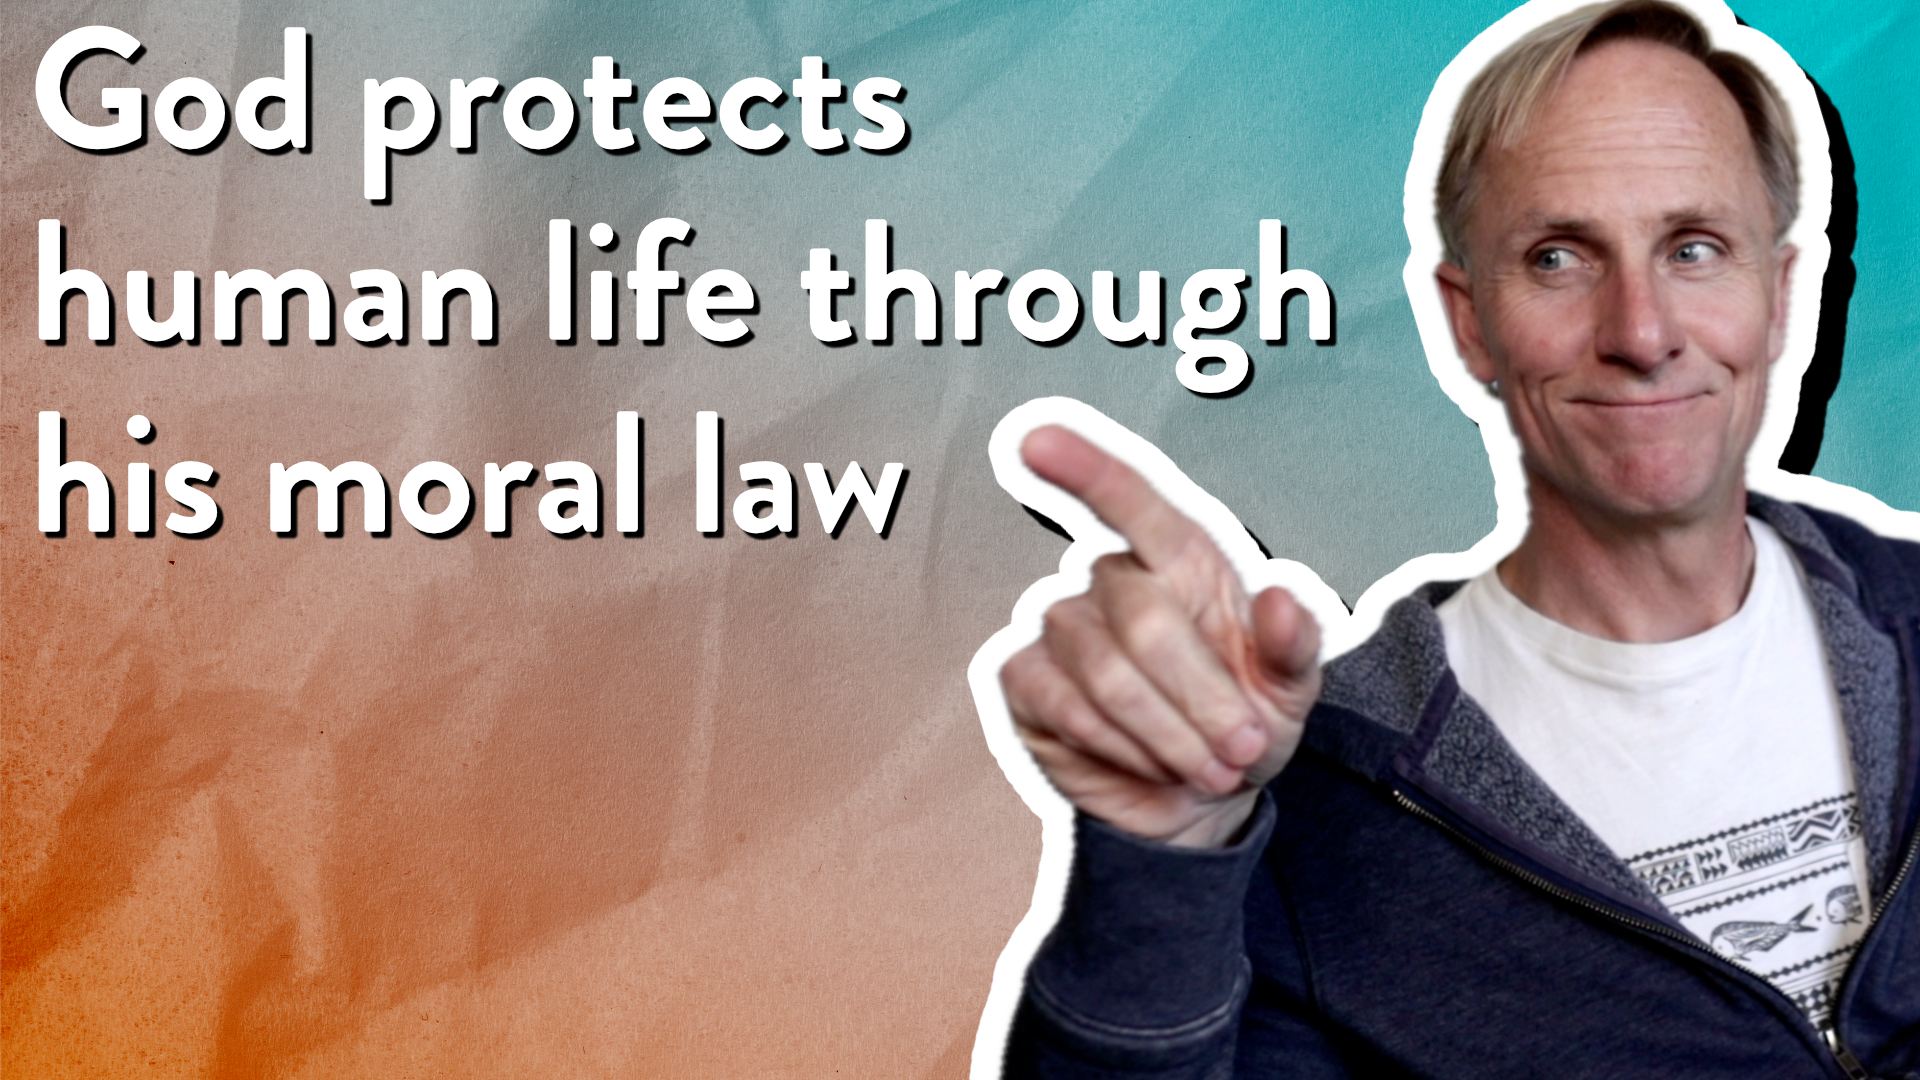 God protects human life through his moral law